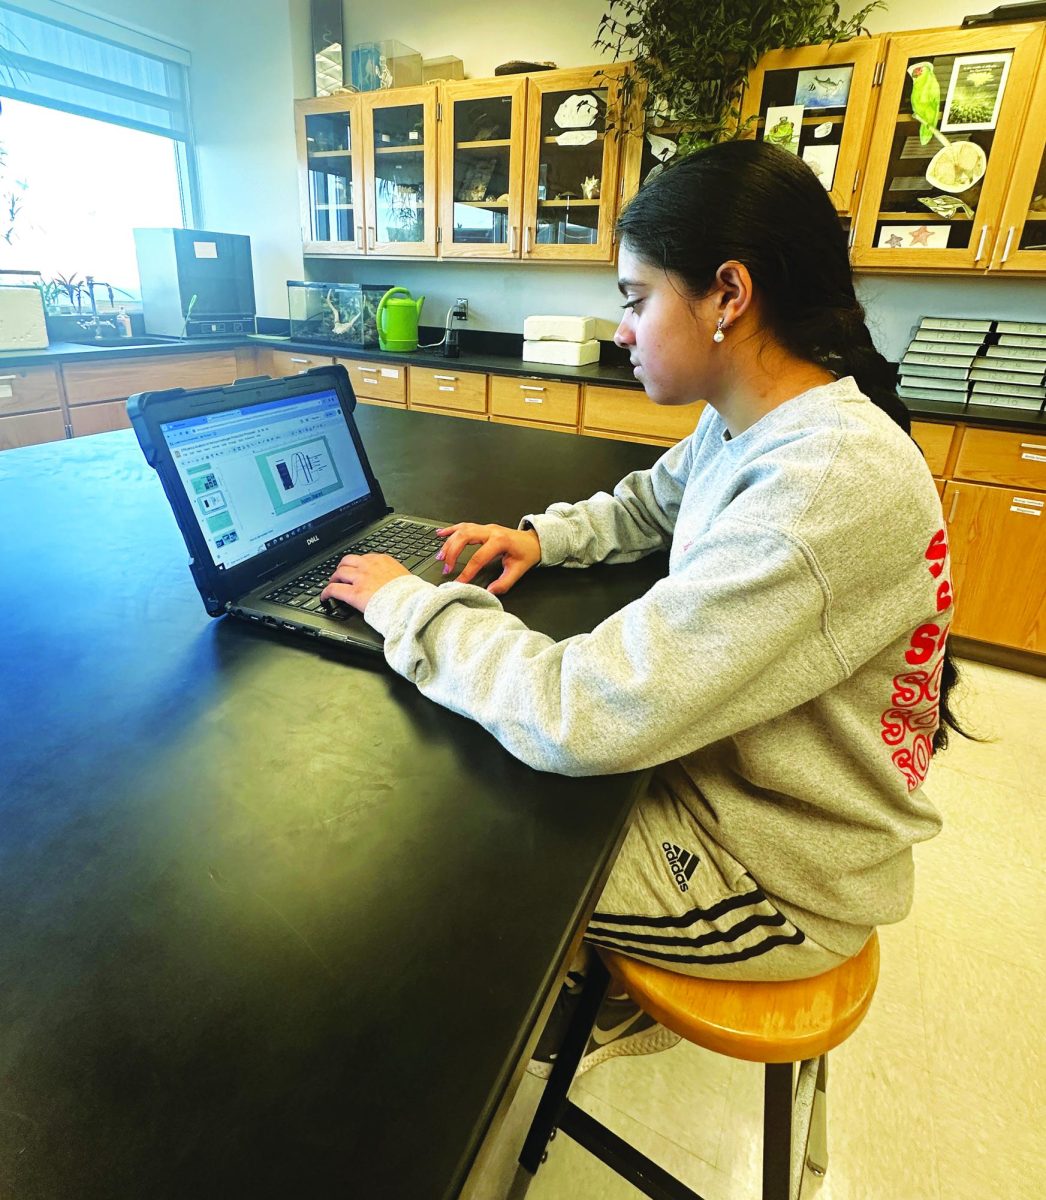 Project planning…Working on her science fair slideshow, sophomore Pranati Jammalamadaka prepares for the PJAS competition, which took place on February 24.
